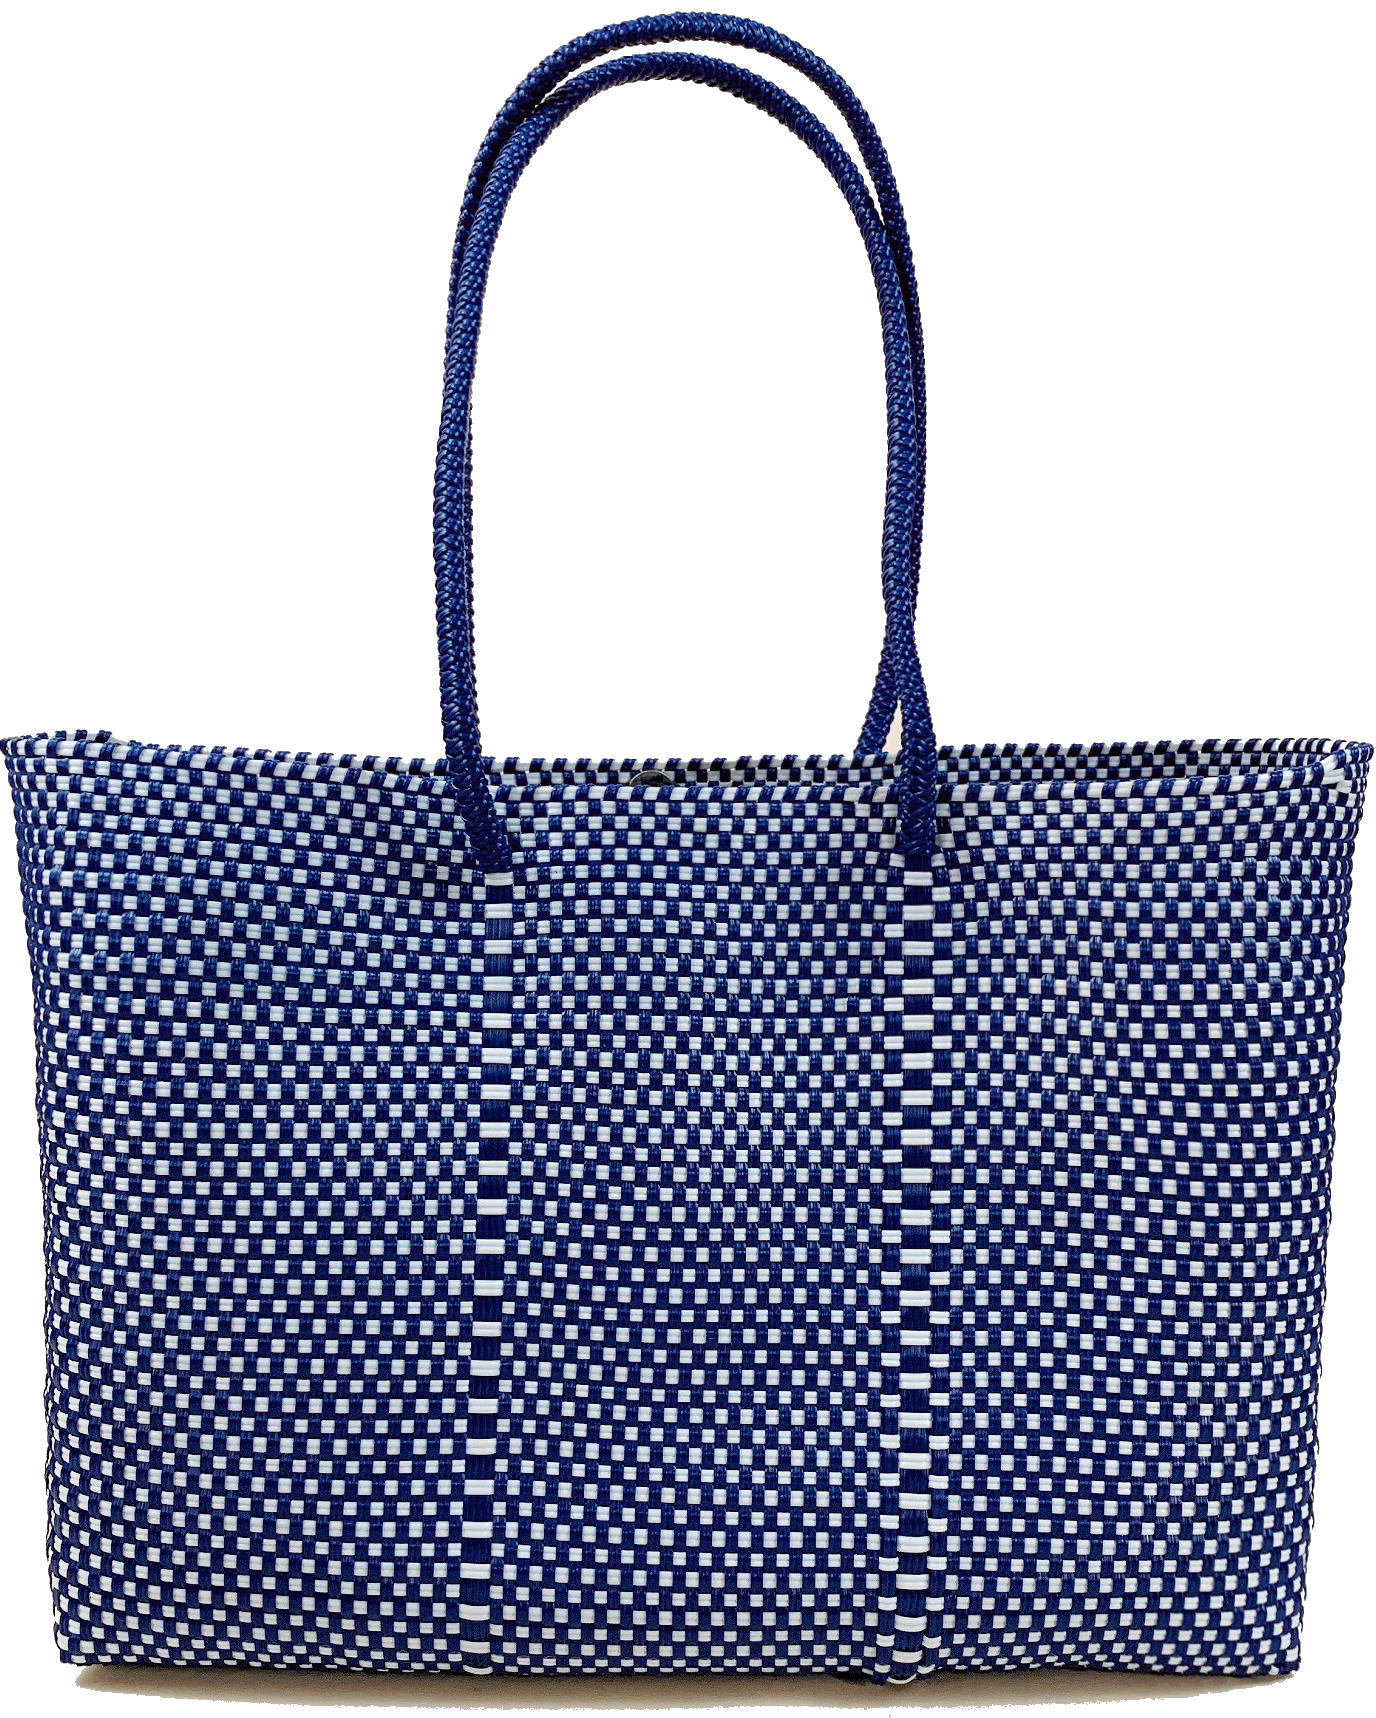 Small Tote - Navy and White